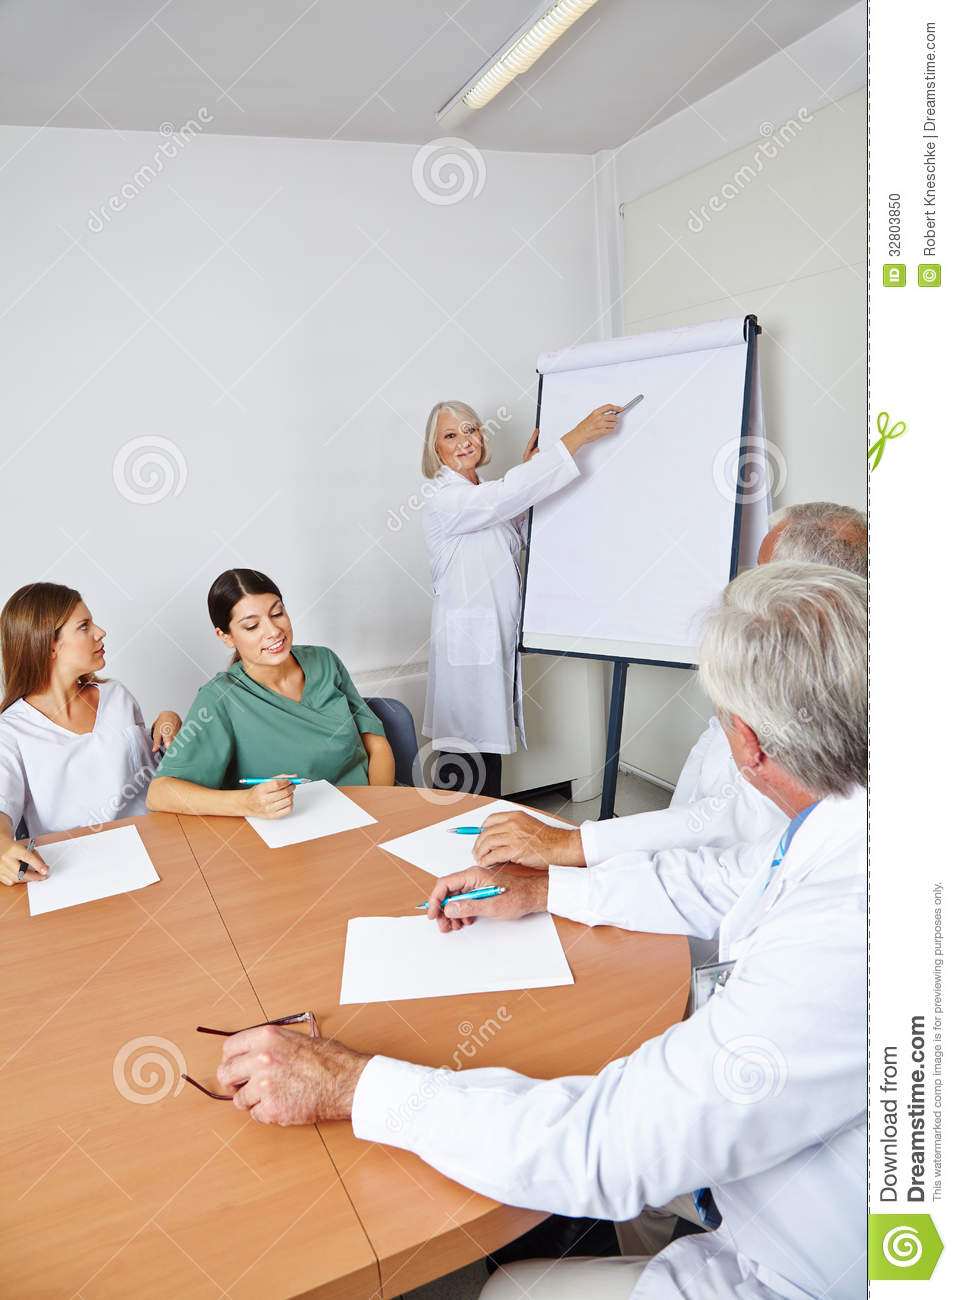 Doctor Giving Lecture At Team Meeting Stock Photo   Image  32803850